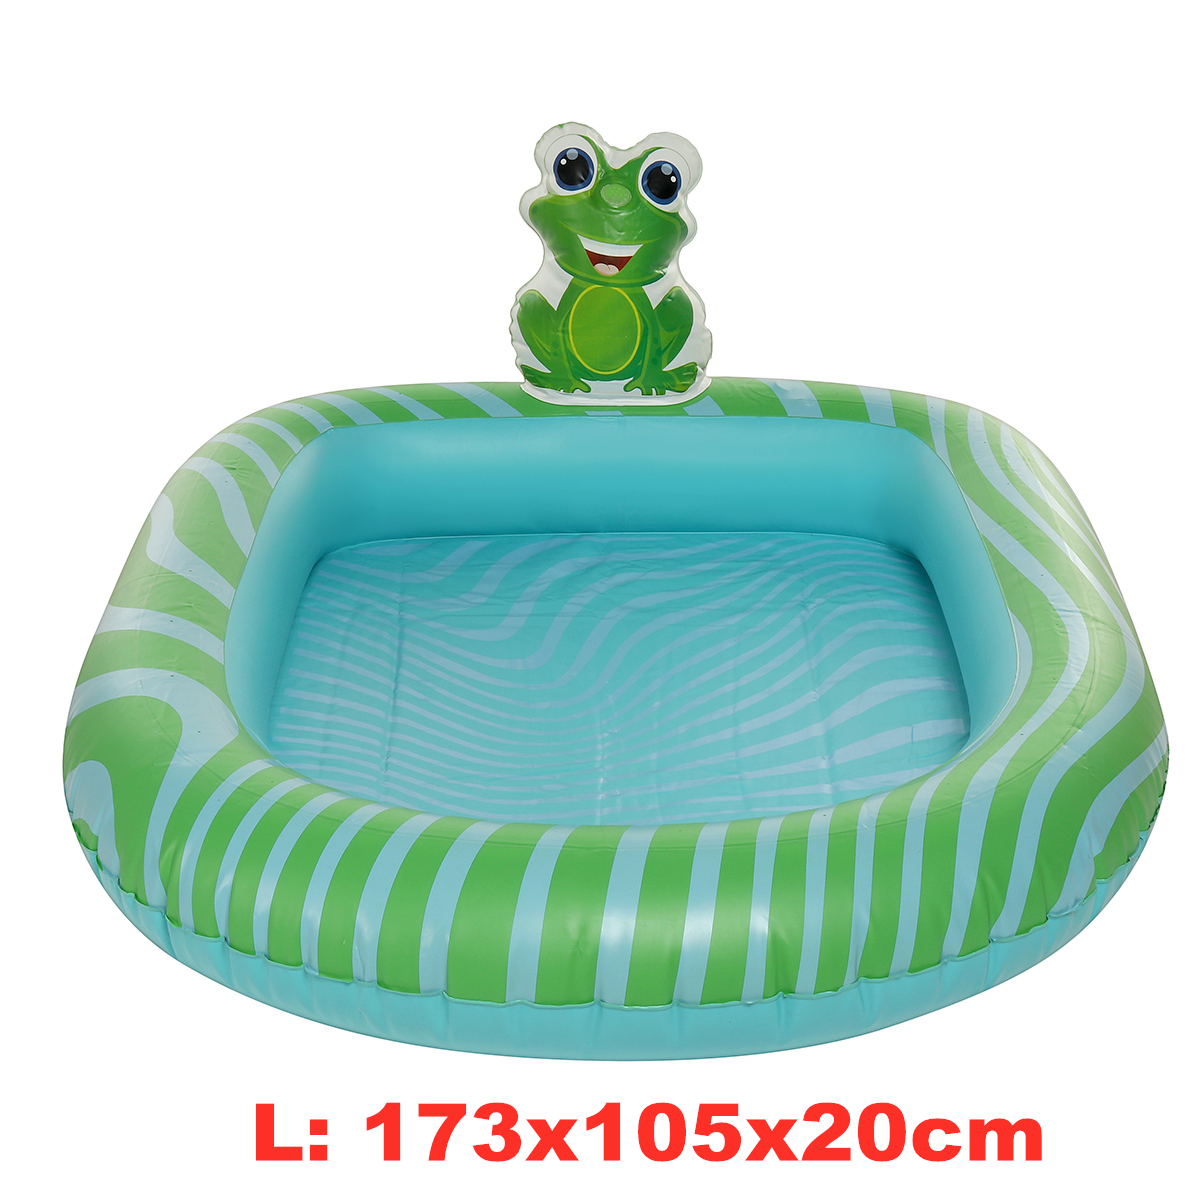 PVC-Children-Inflatable-Swimming-Pool-Sprinkler-Pool-Thickened-Cartoon-Pattern-Outdoor-Swimming-Wate-1851764-9